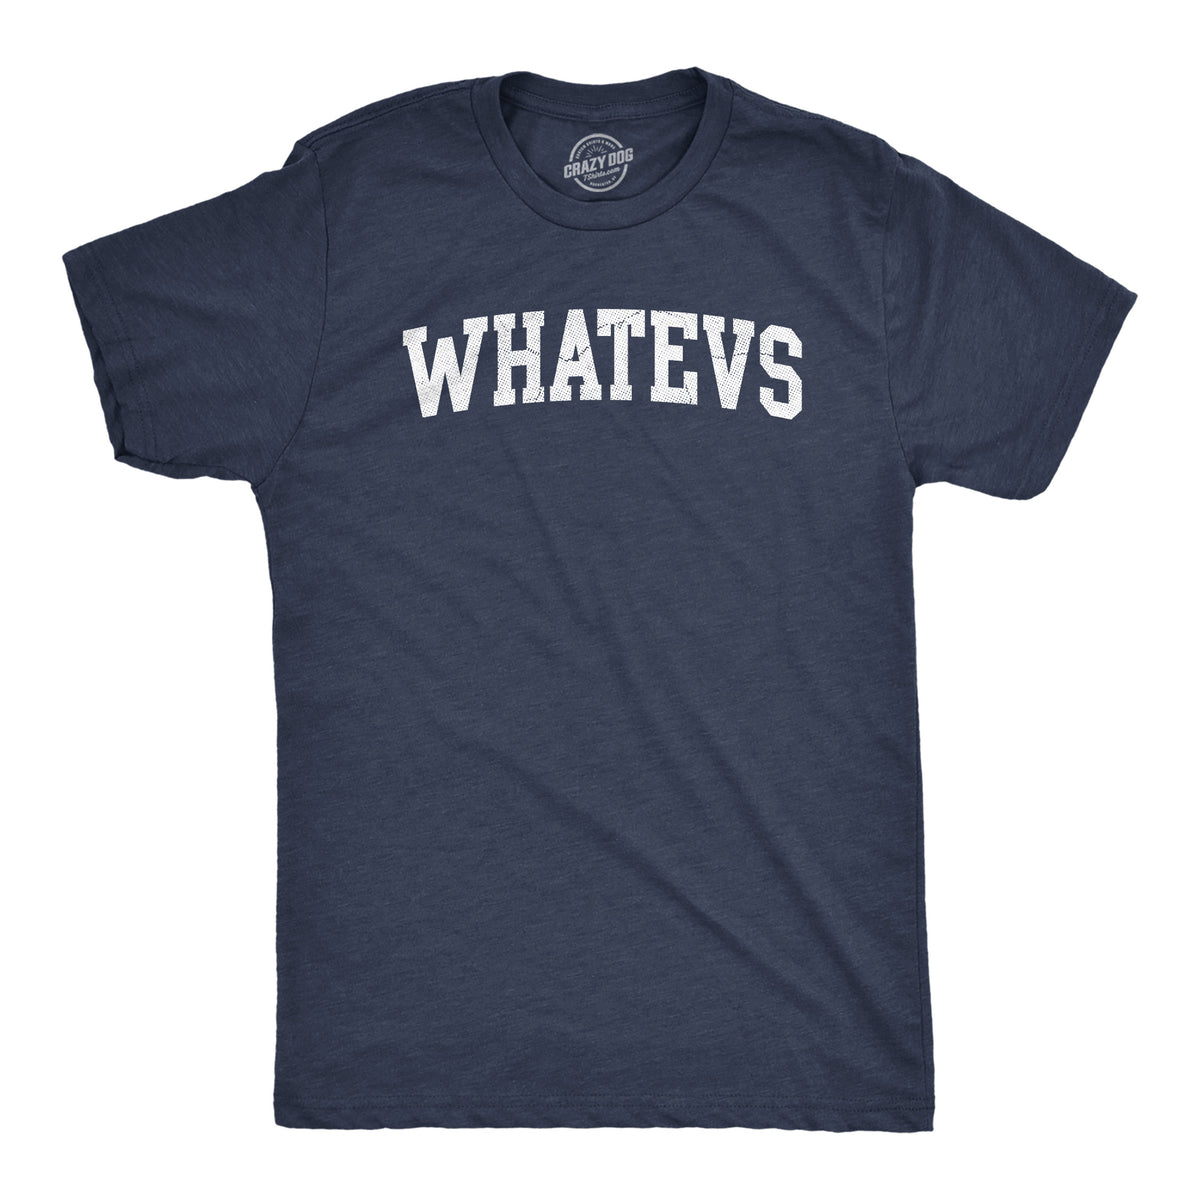 Funny Heather Navy - WHATEVS Whatevs Mens T Shirt Nerdy Sarcastic Tee